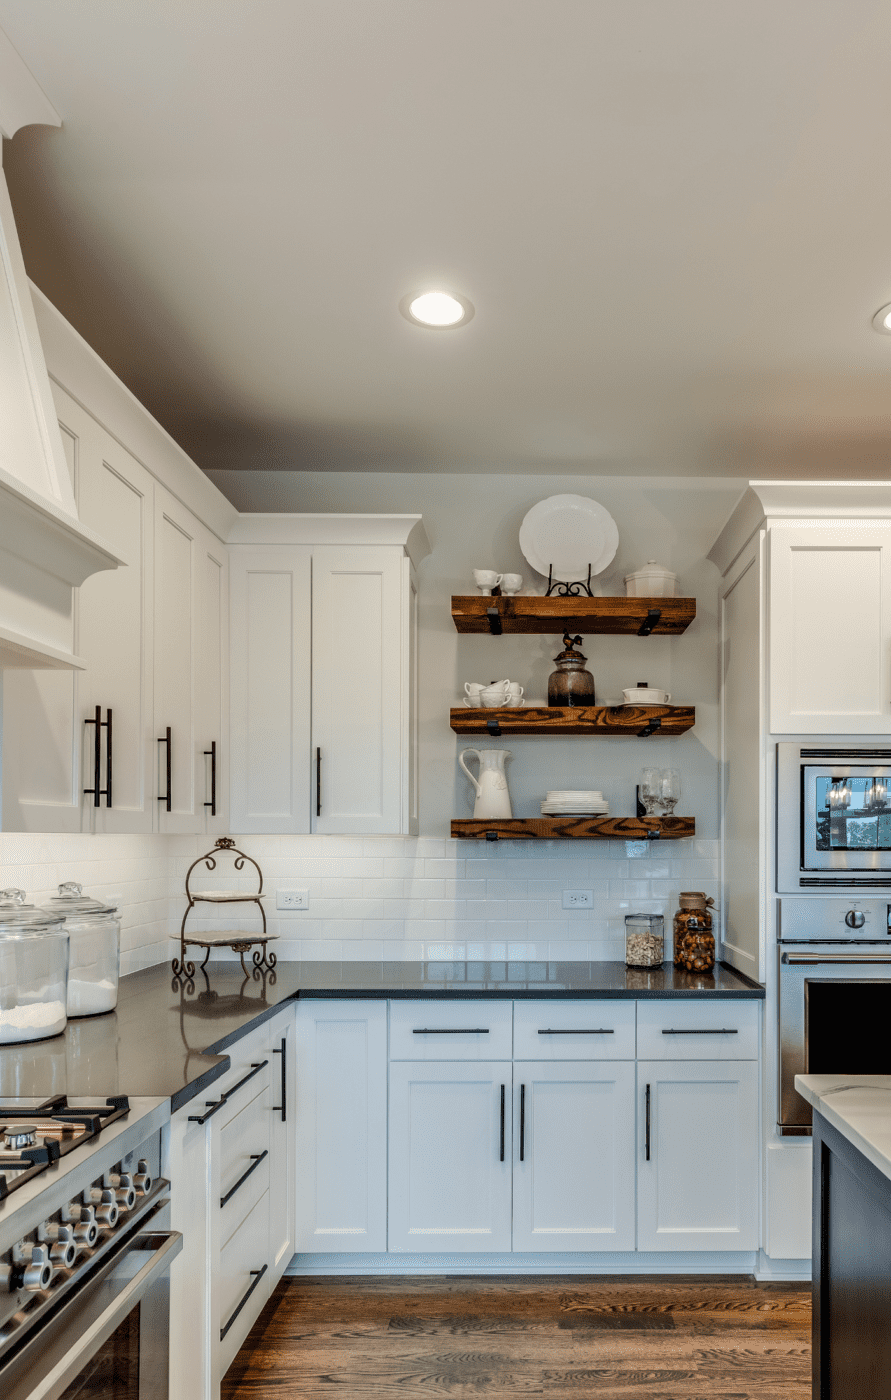 A white and black kitchen with a brown open shelving unit.